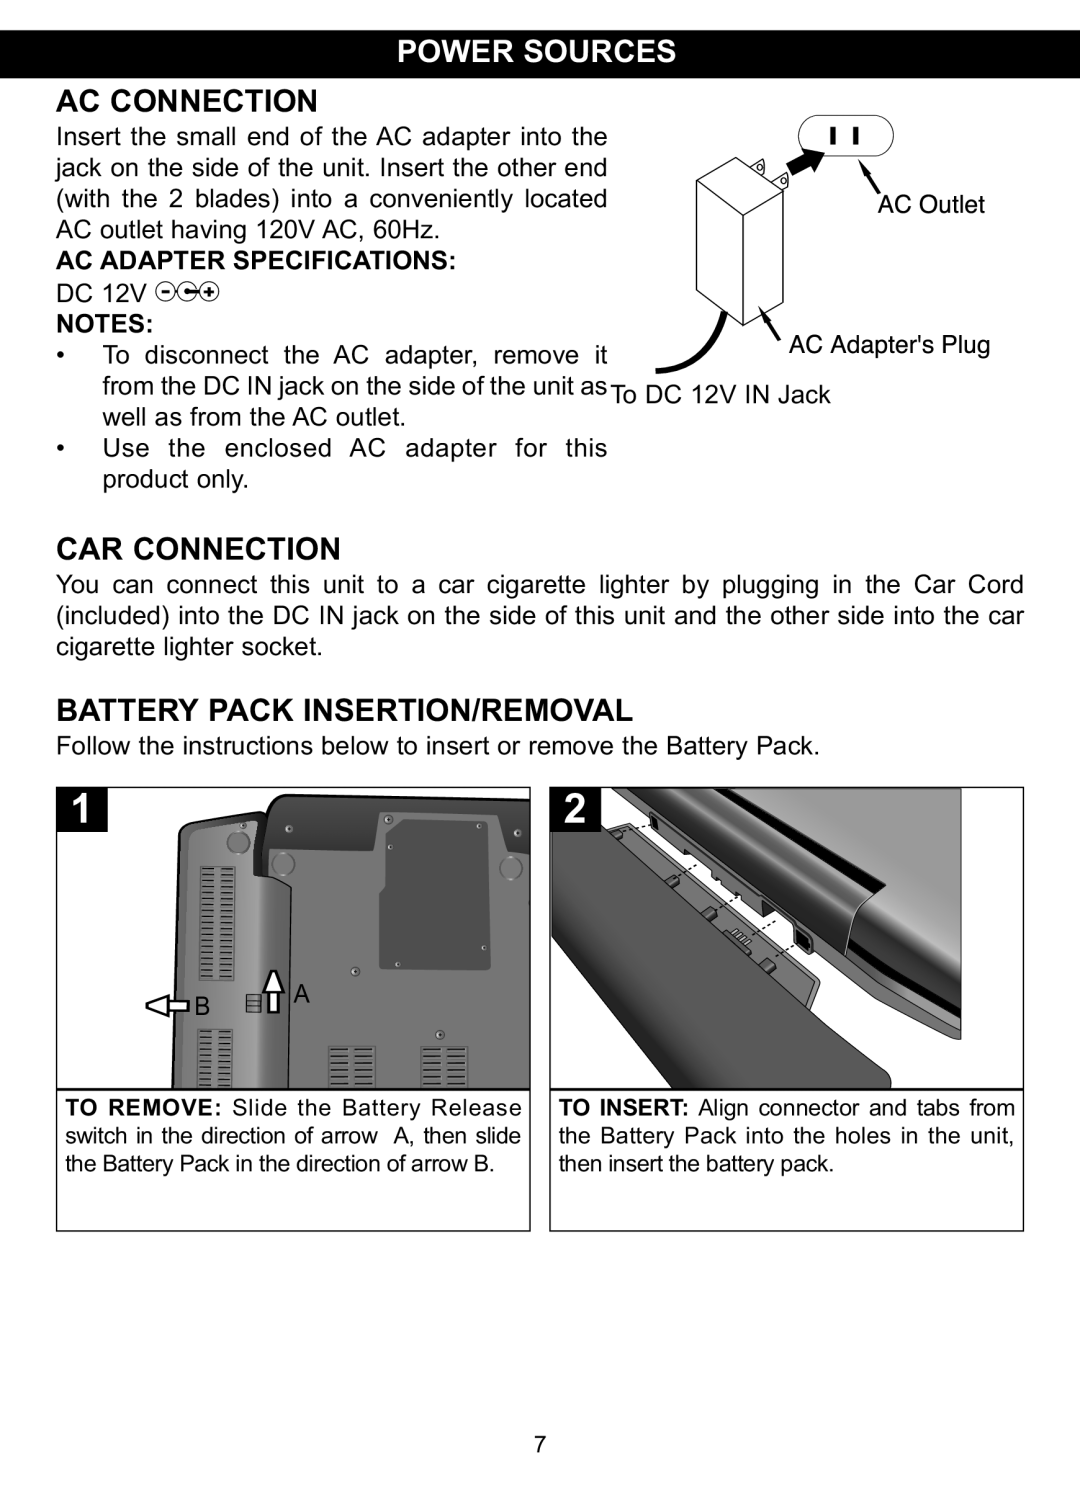 Memorex MVDP1088 manual Ac Connection, Car Connection, Battery Pack Insertion/Removal, Ac Adapter Specifications, Notesz 